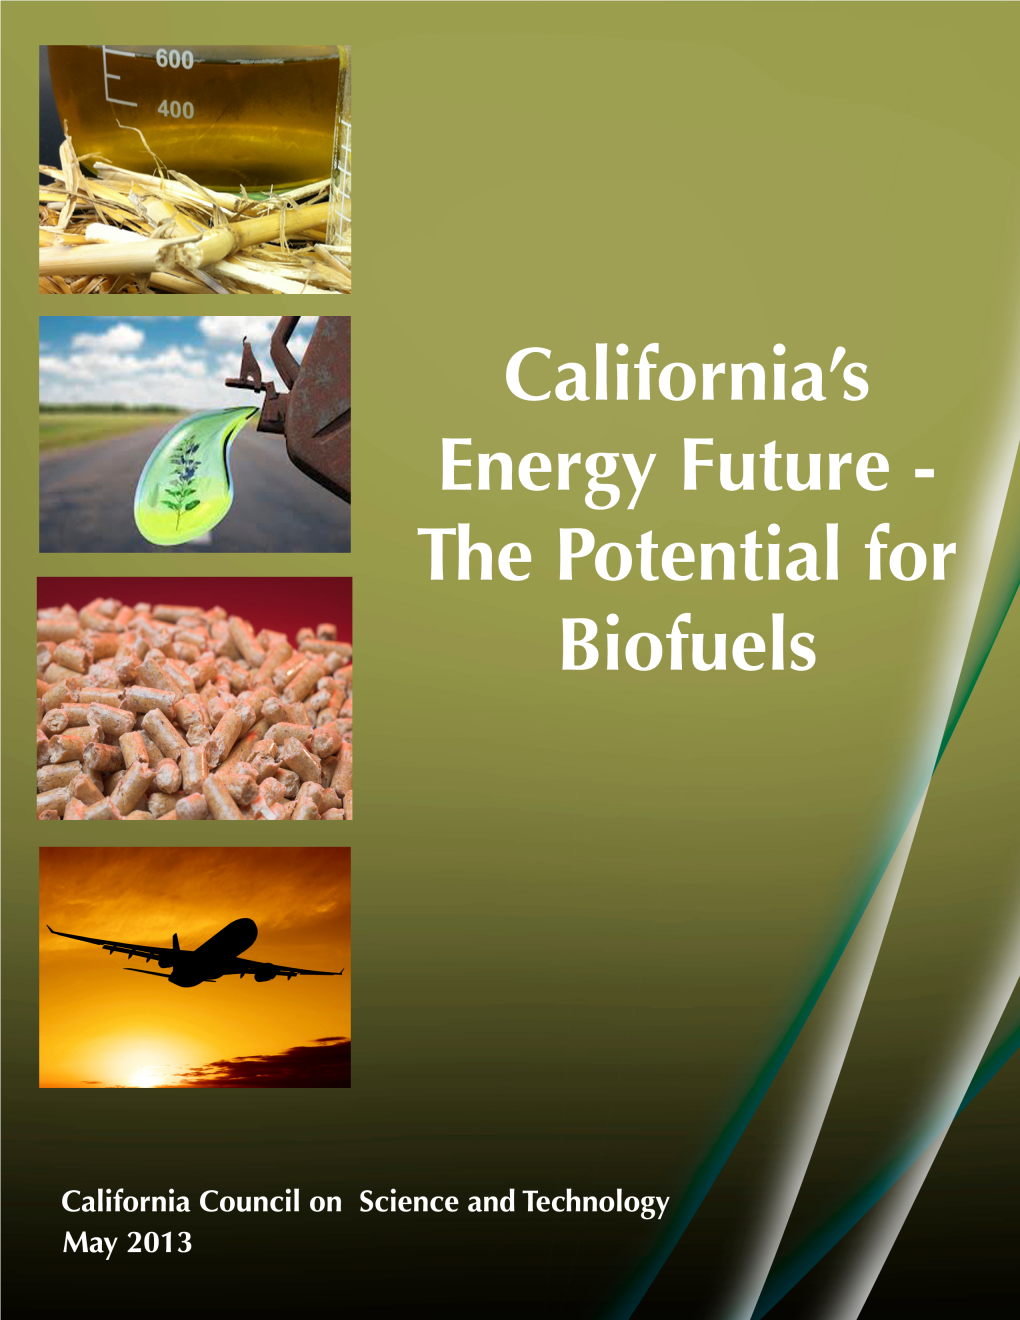 California's Energy Future—The Potential for Biofuels